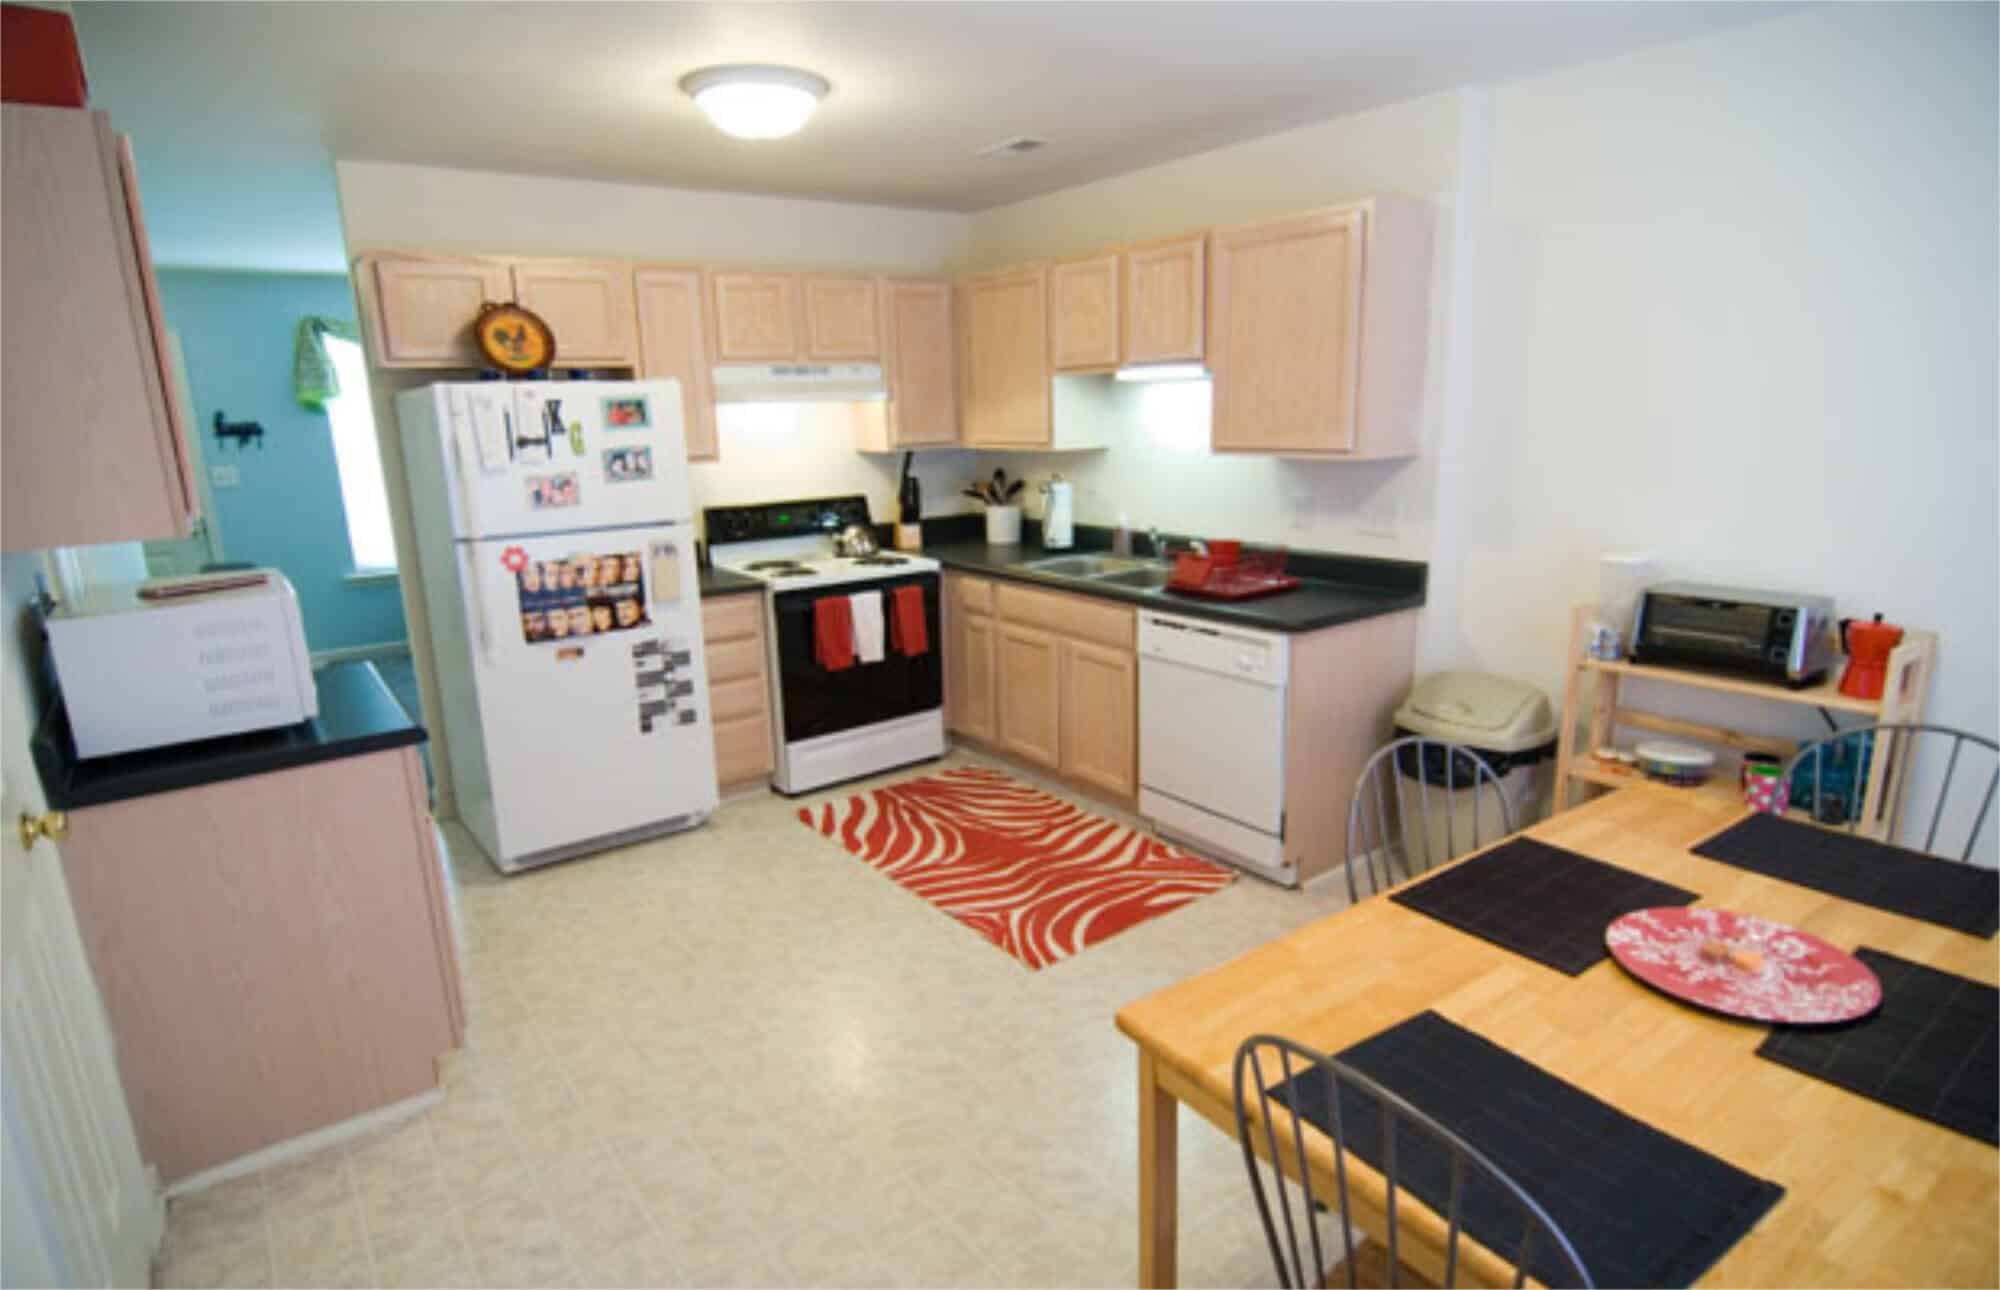 raleigh off campus off campus apartments near nc state university full kitchen with dining area